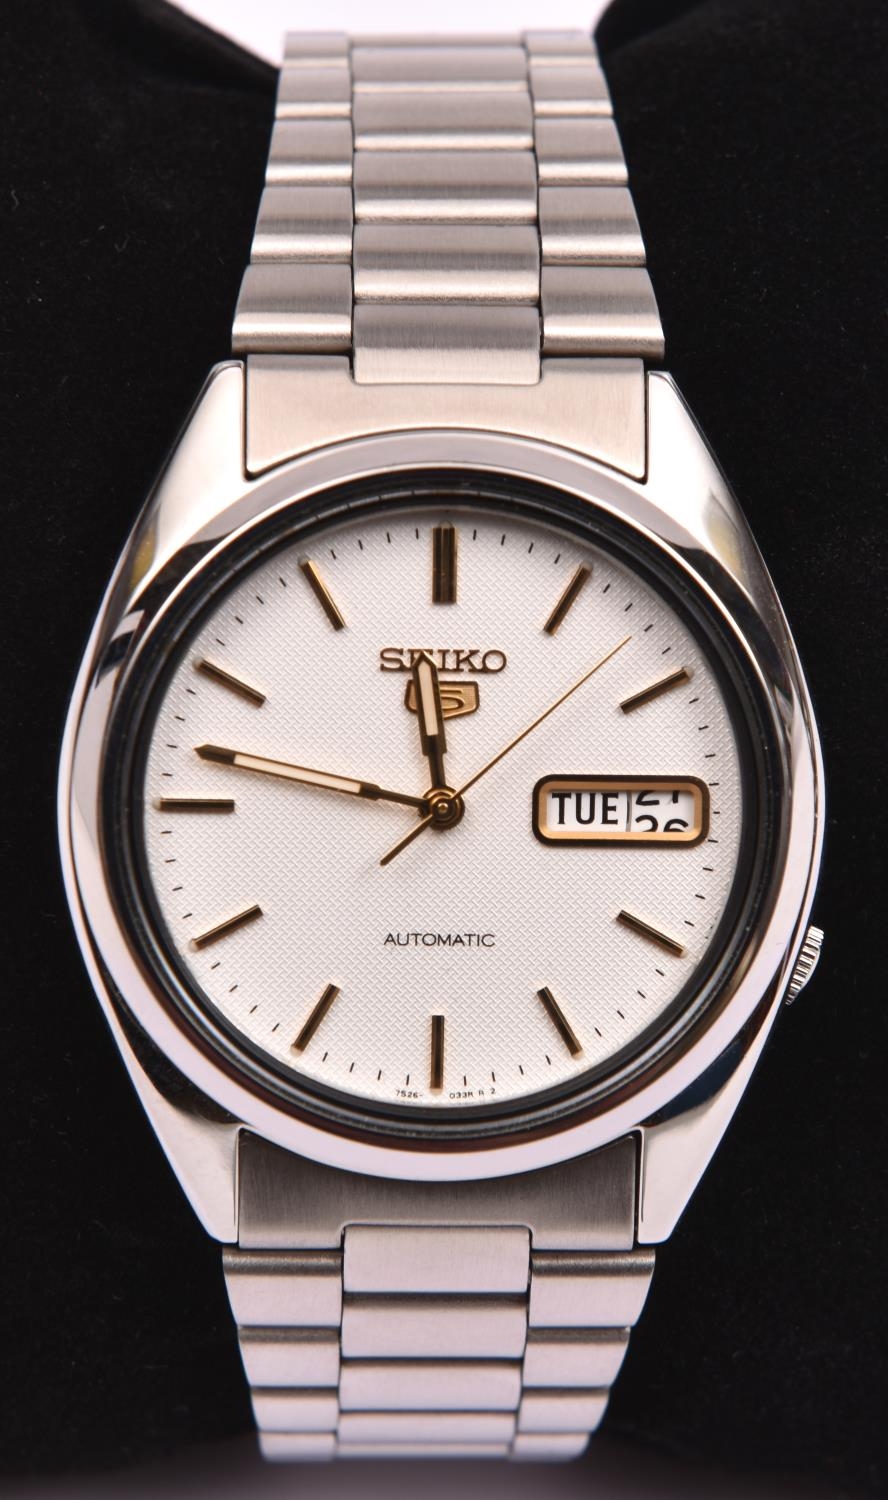 A Seiko Perpetual Calendar Cal.6A32 Automatic watch with automatic self